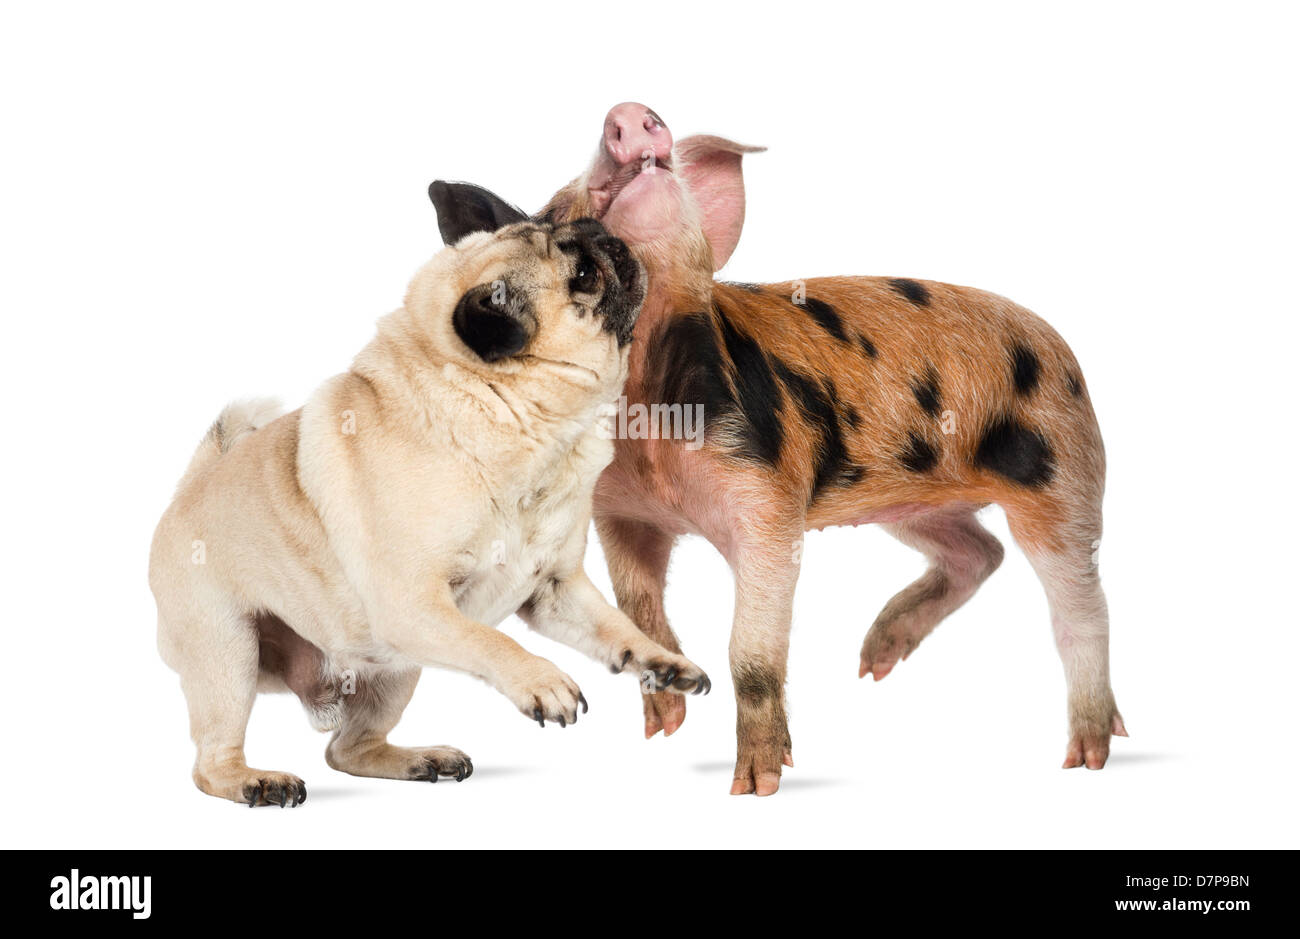 Oxford Sandy and Black piglet, 9 weeks old, sniffing a Pug against white background Stock Photo